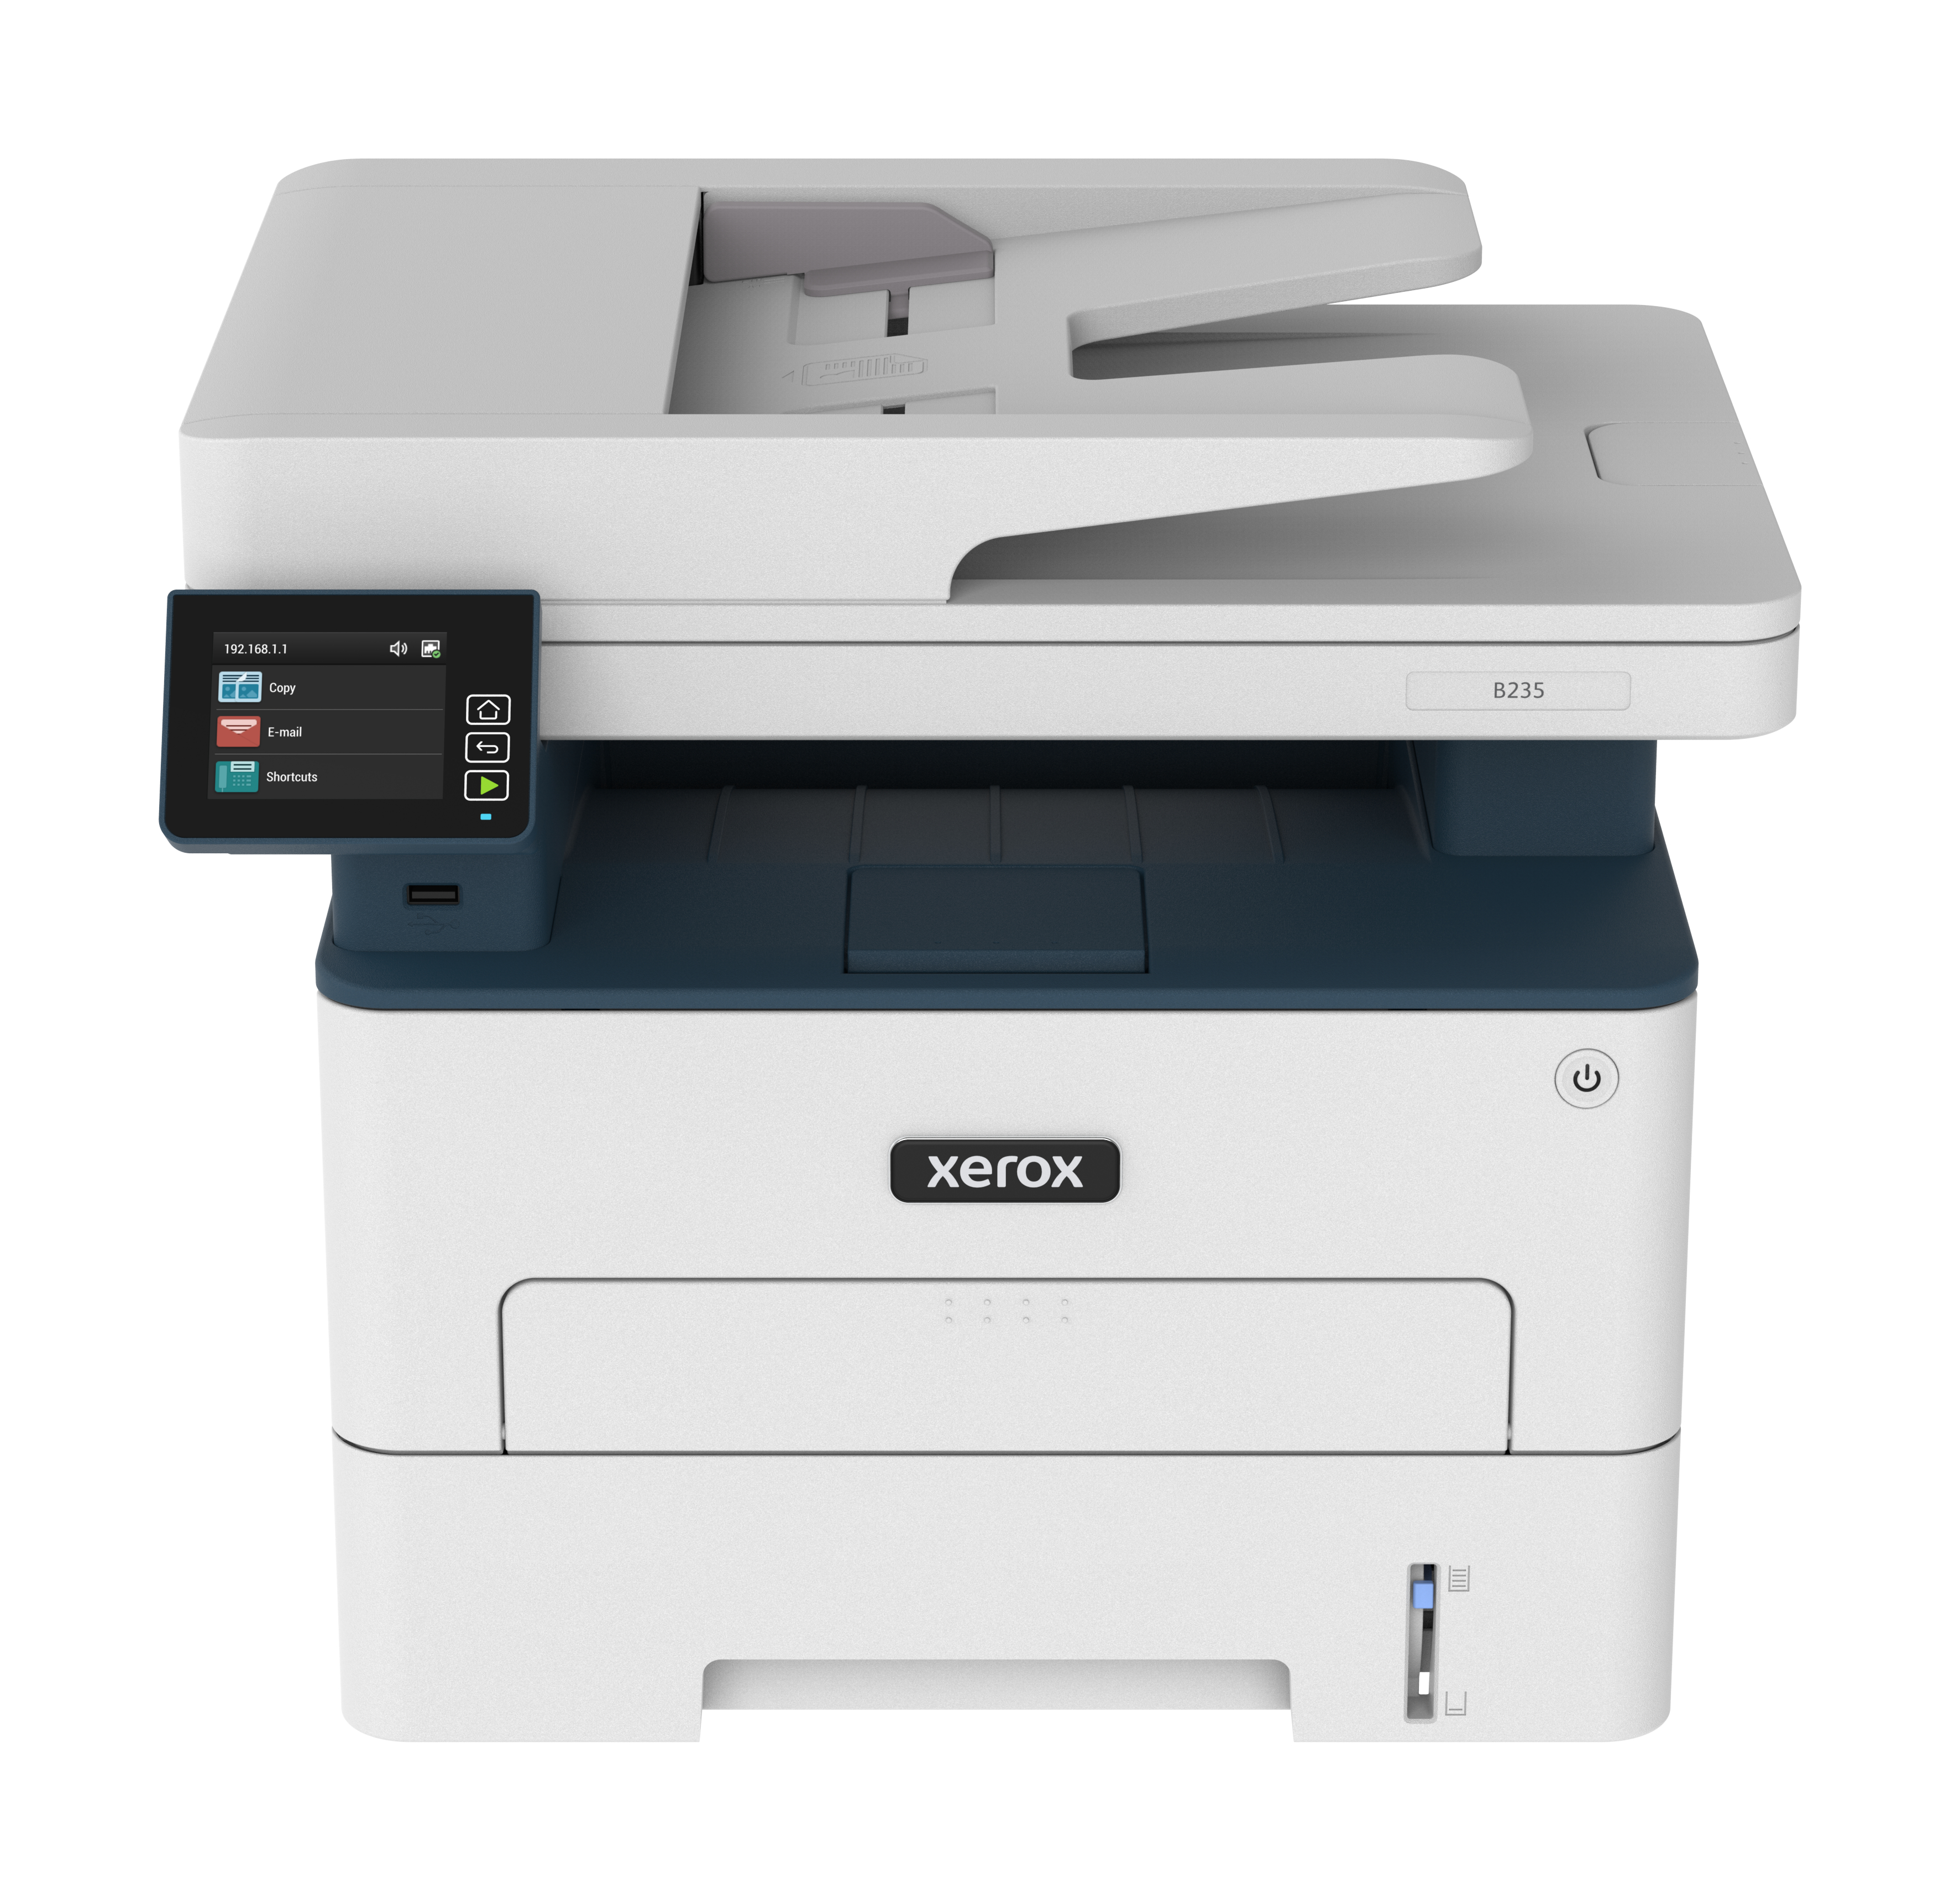 Xerox B235 Multifunction Printer, Print/Copy/Scan/Fax, Up To 36 ppm,  Letter/Legal, USB/Ethernet And Wireless, 250-Sheet Tray, Automatic 2-Sided  Printing, 110V B235/DNI - Xerox